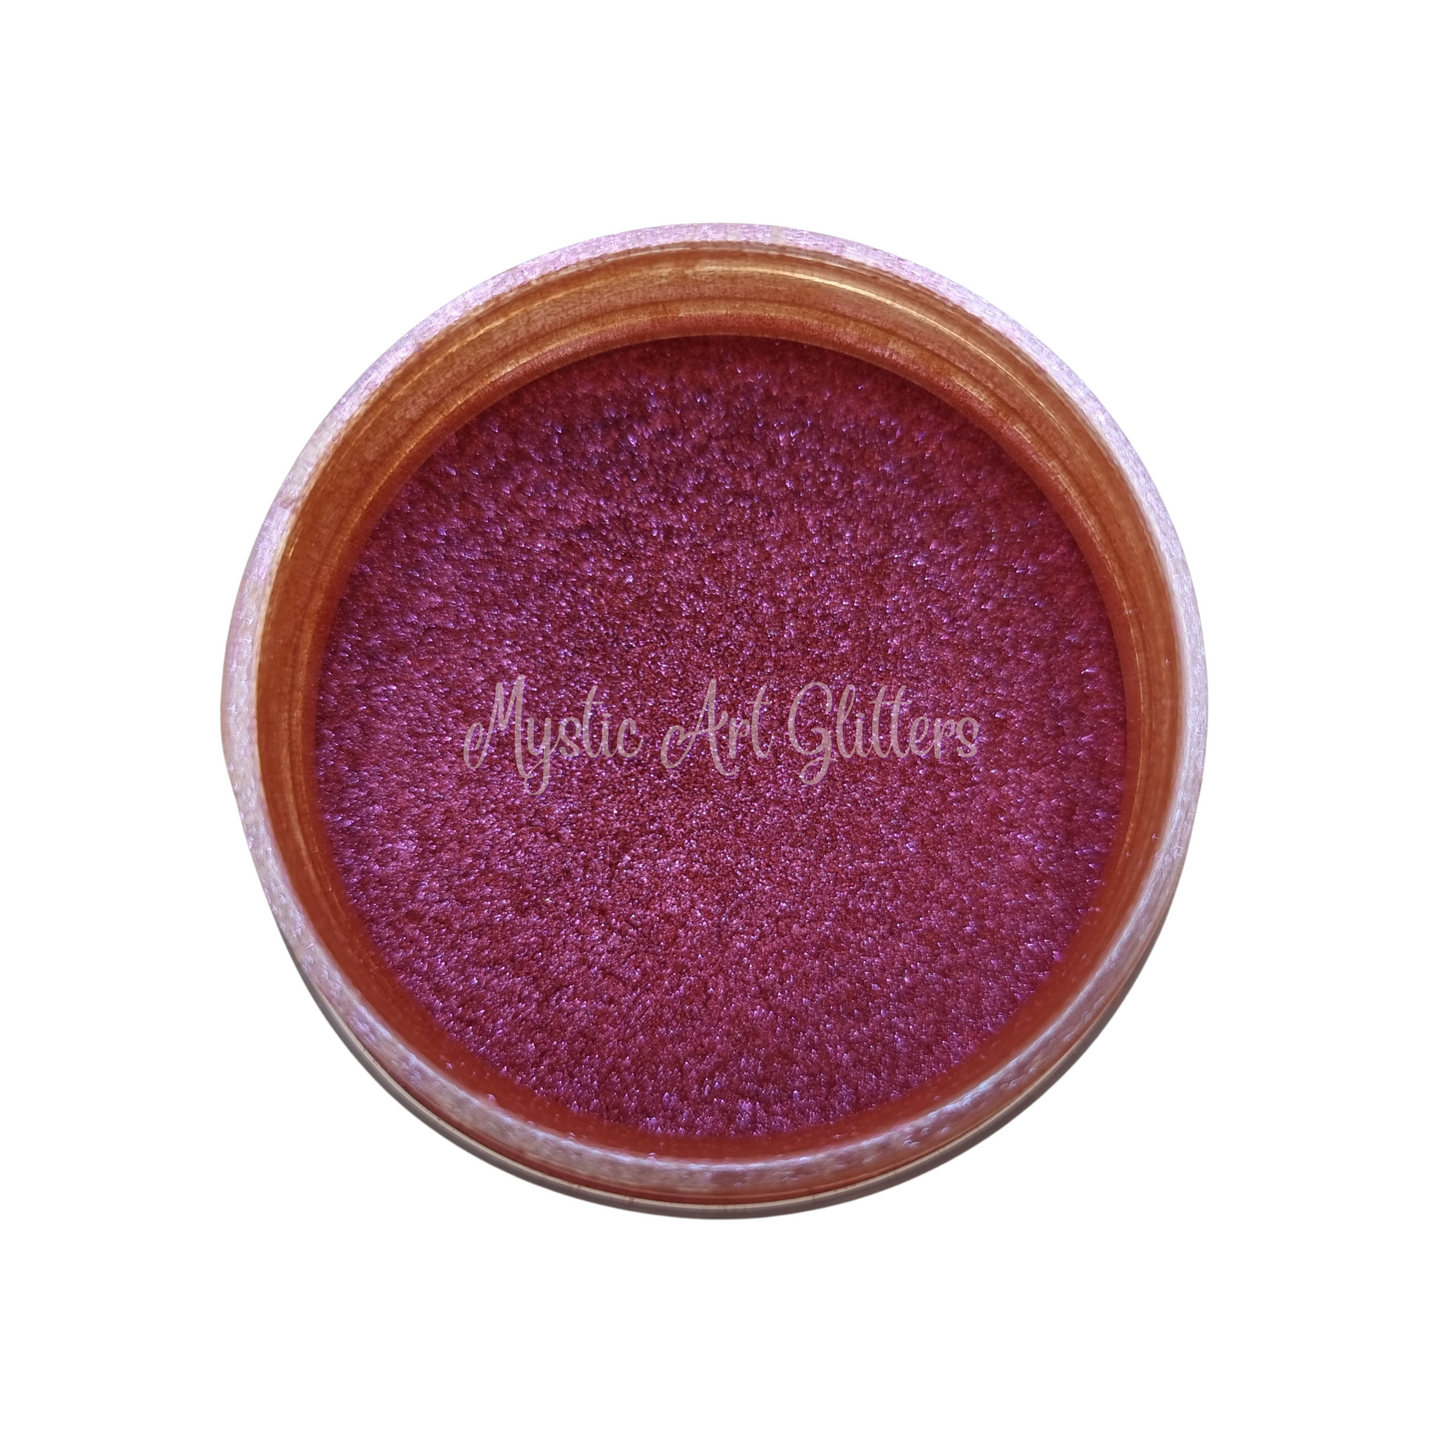 Chameleon Mica Powder - Sparkly Pink to Red Shift 14gm - Mystic Art Glitters